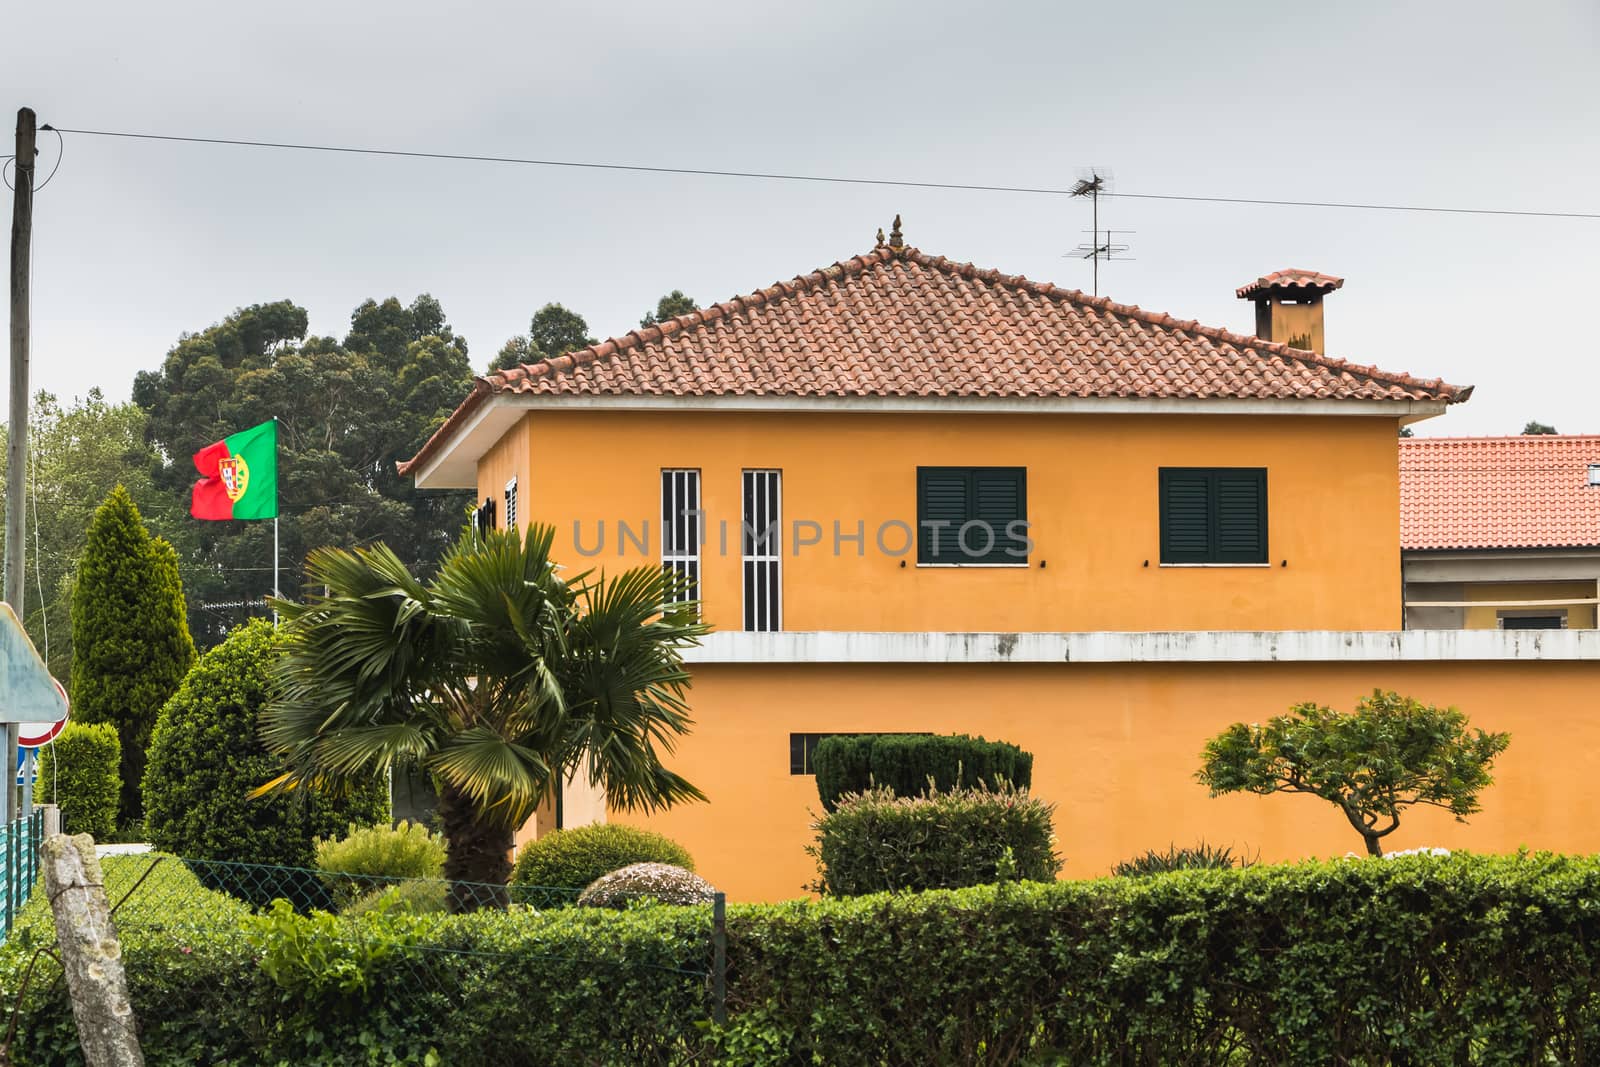 Architecture detail of typical house in a small village in north by AtlanticEUROSTOXX